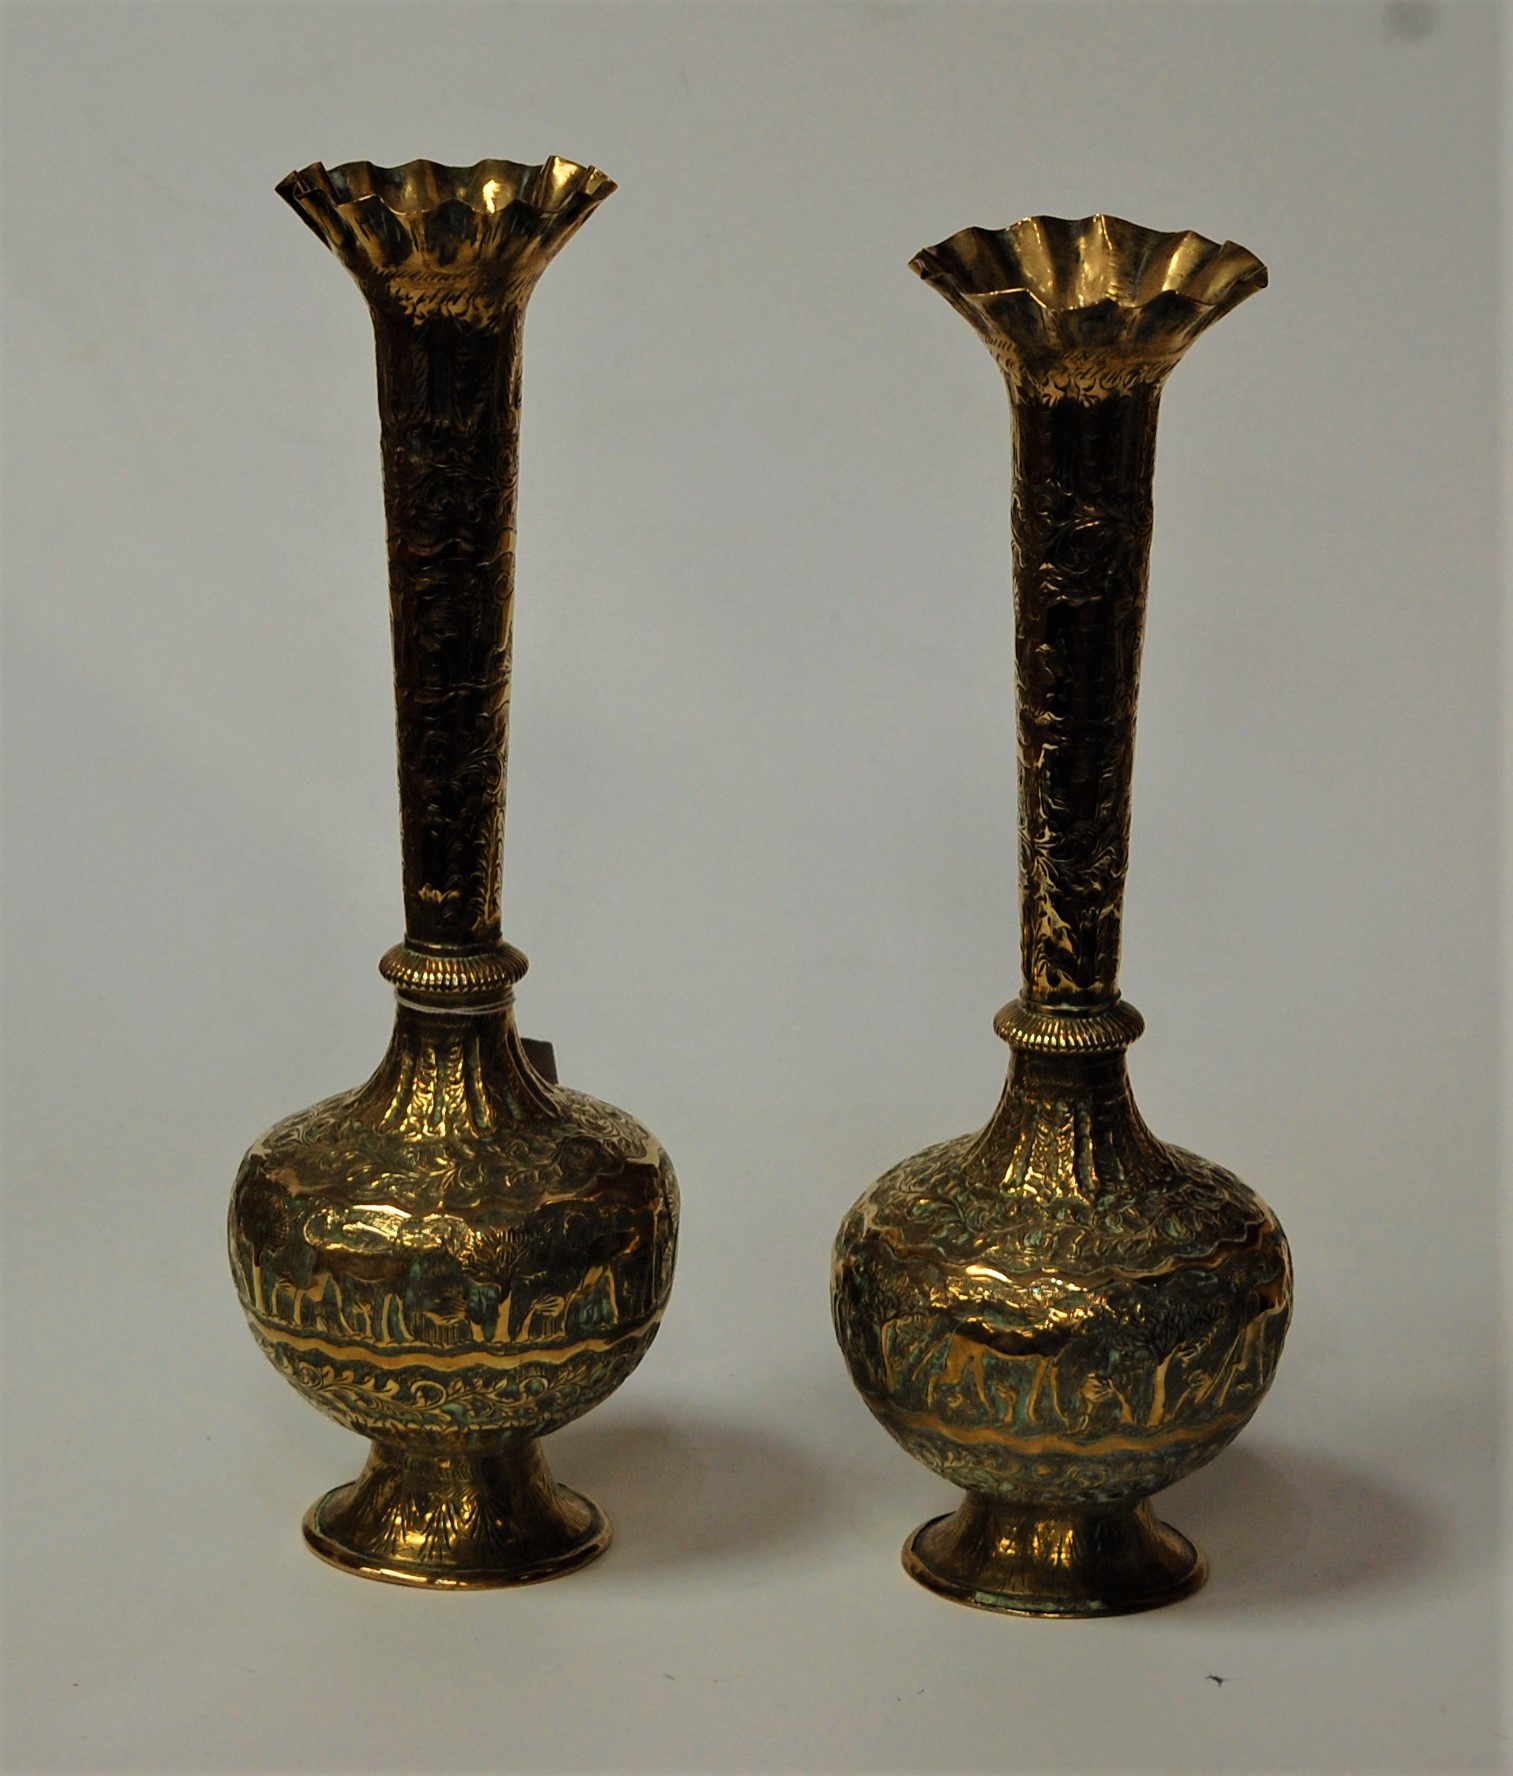 A pair of Indian brass vases, each having a flared rim to a slender tapering neck and bulbous